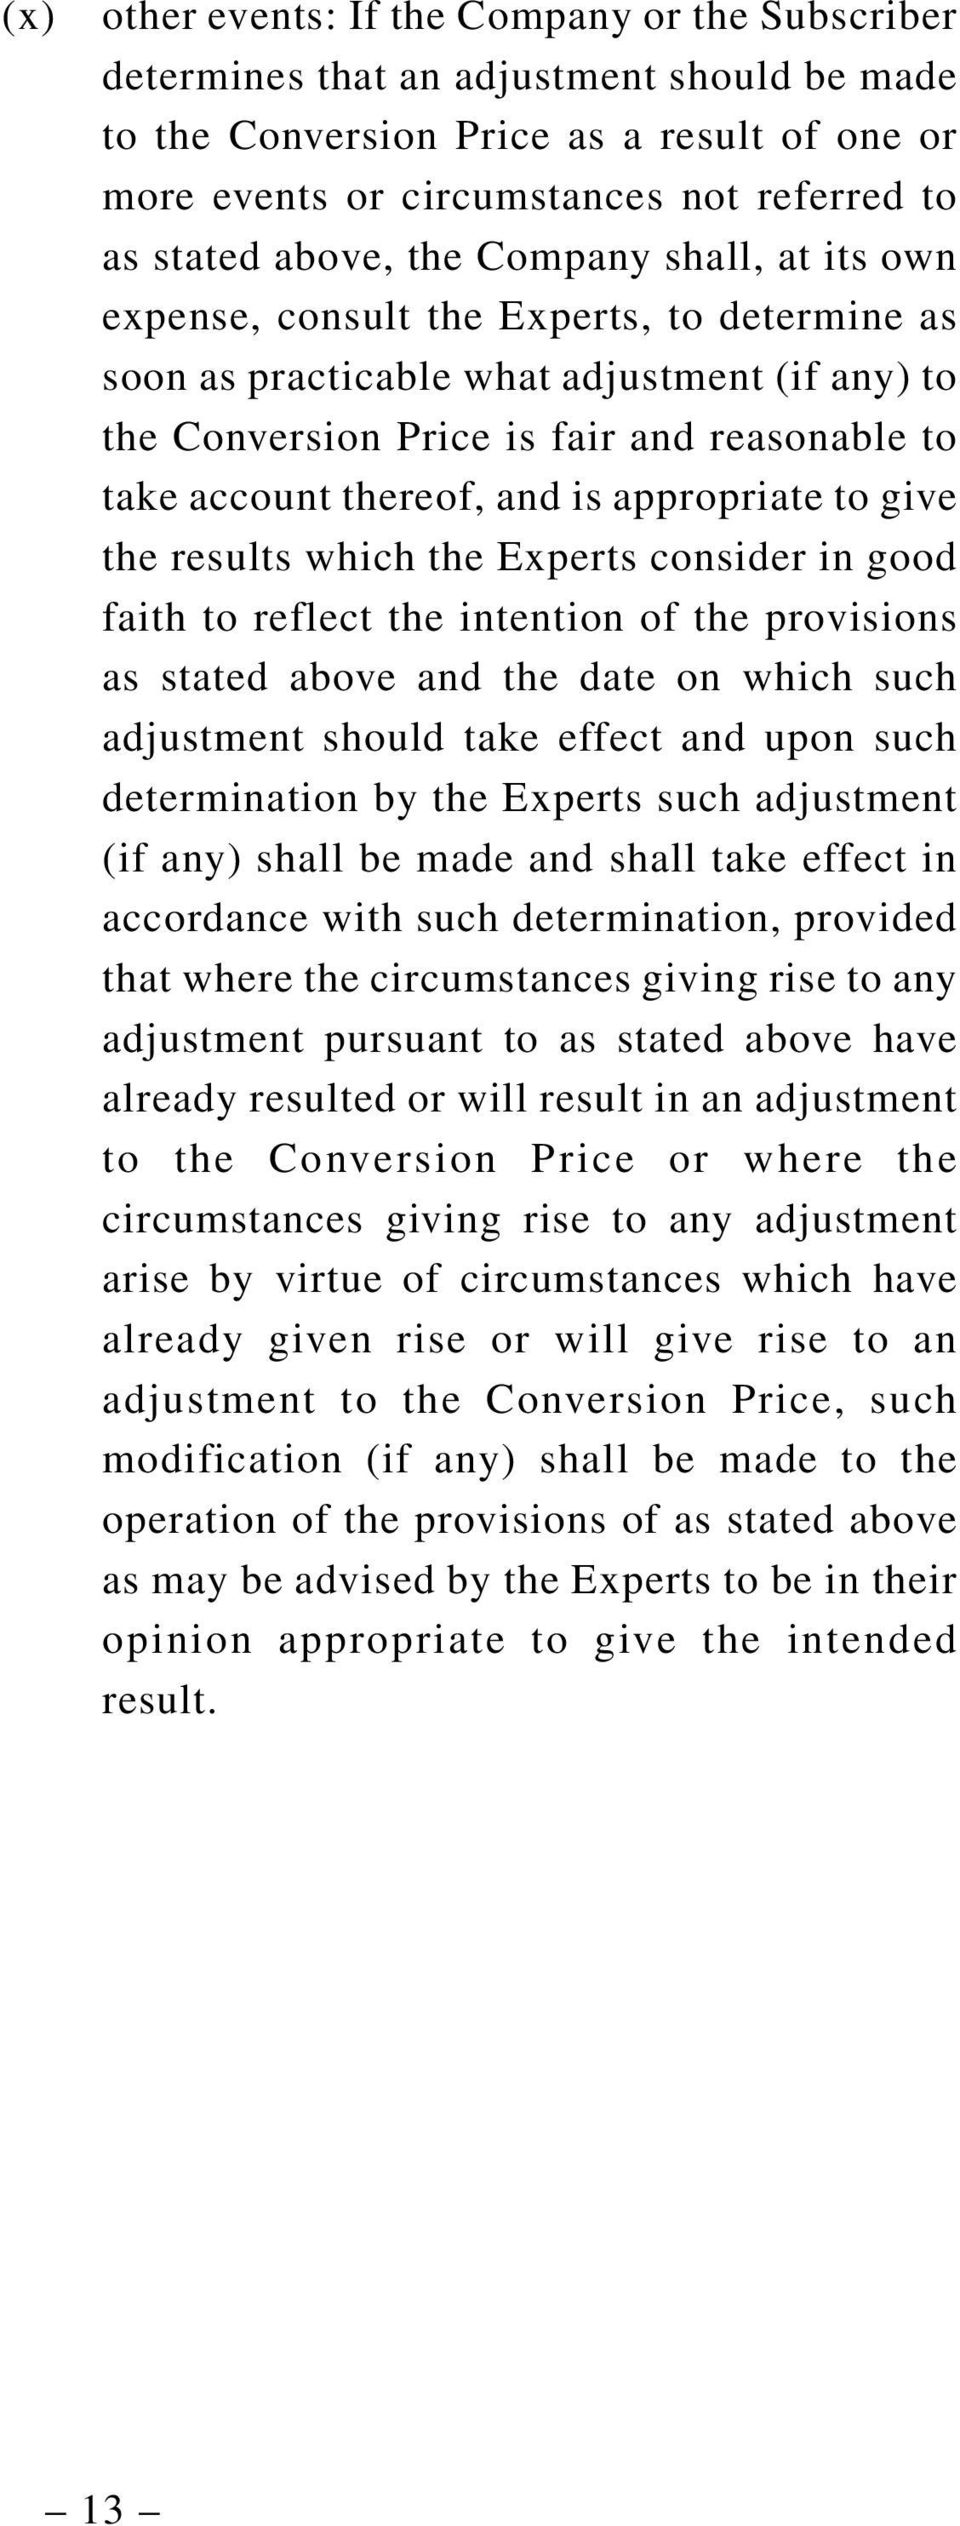 and is appropriate to give the results which the Experts consider in good faith to reflect the intention of the provisions as stated above and the date on which such adjustment should take effect and